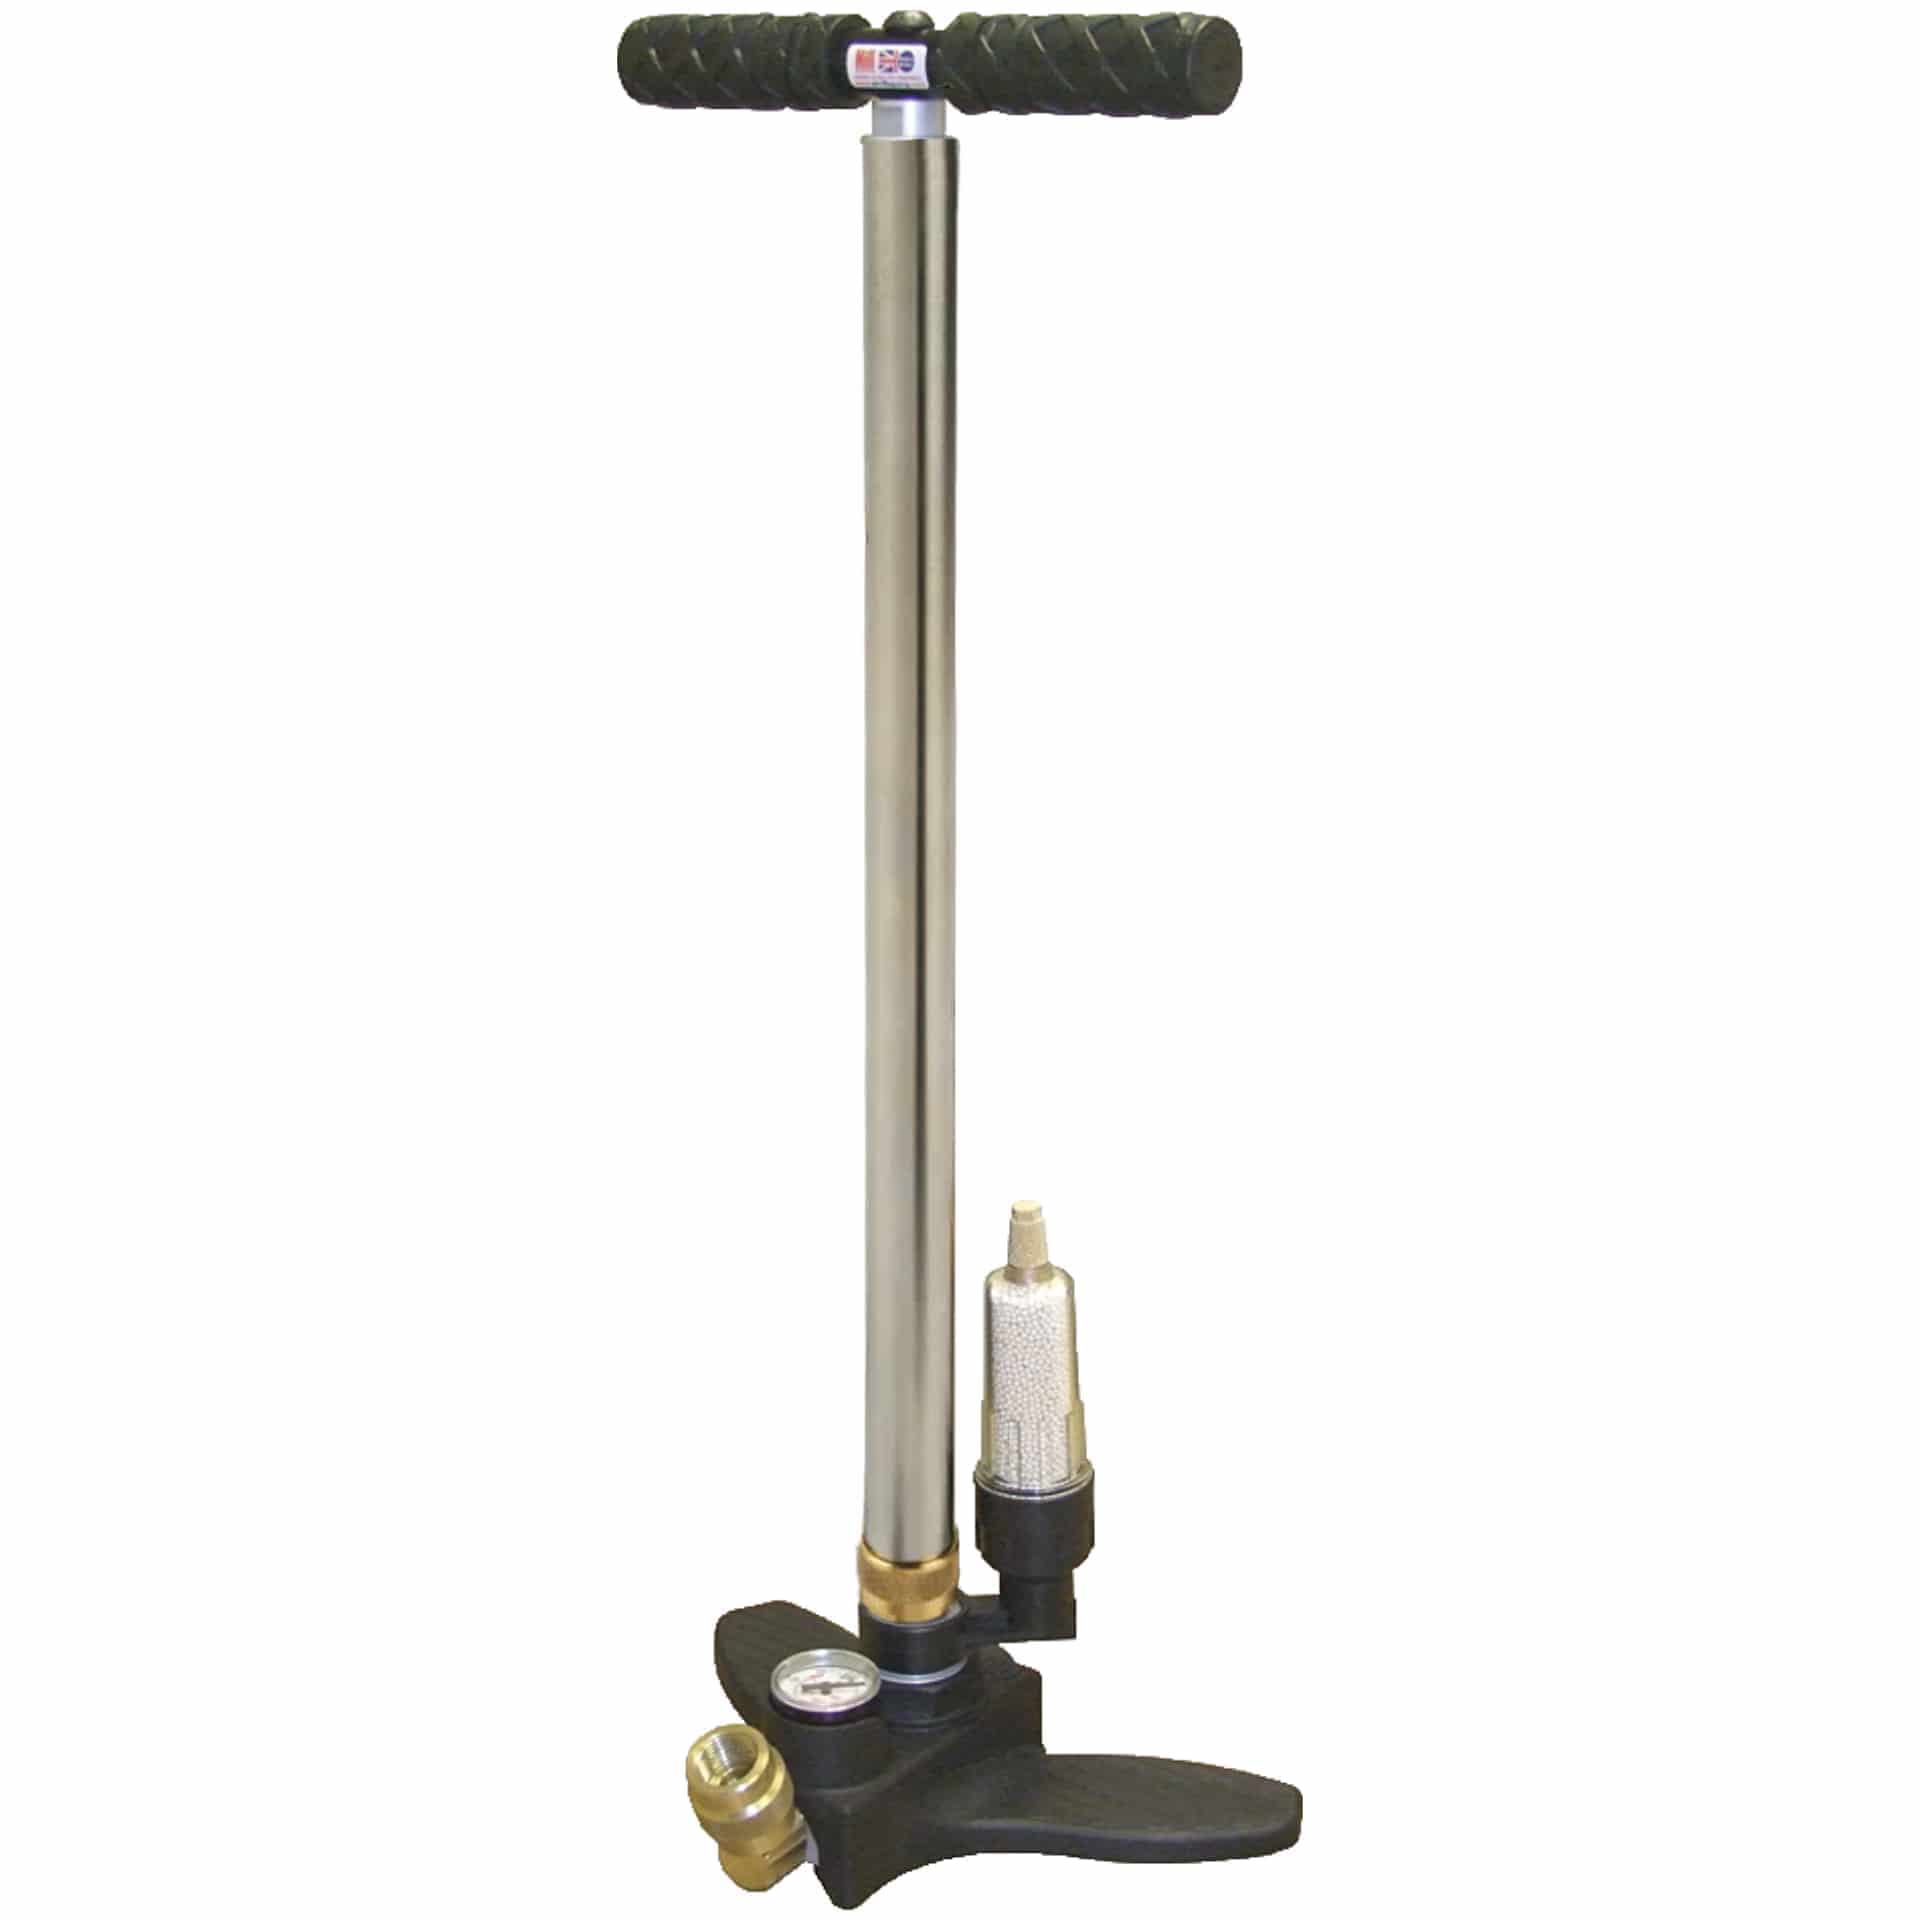 Hand pump MK5 with dry air unit